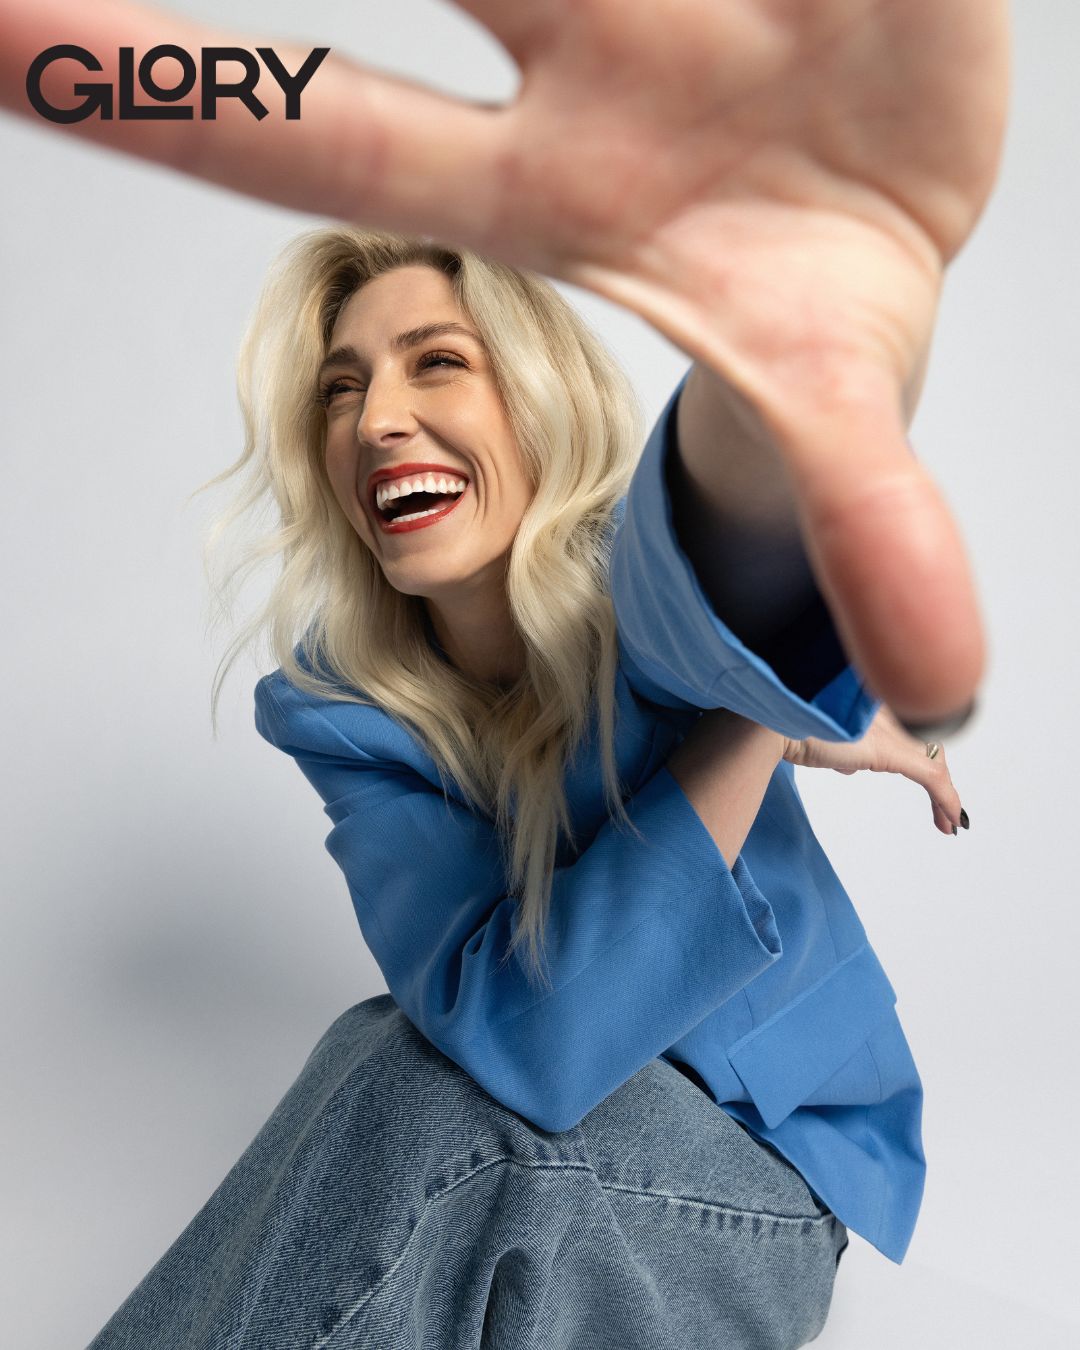 closeup shot of Piper Gilles laughing and a hand reaching out to a camera wearing a blue blazer and jeans.